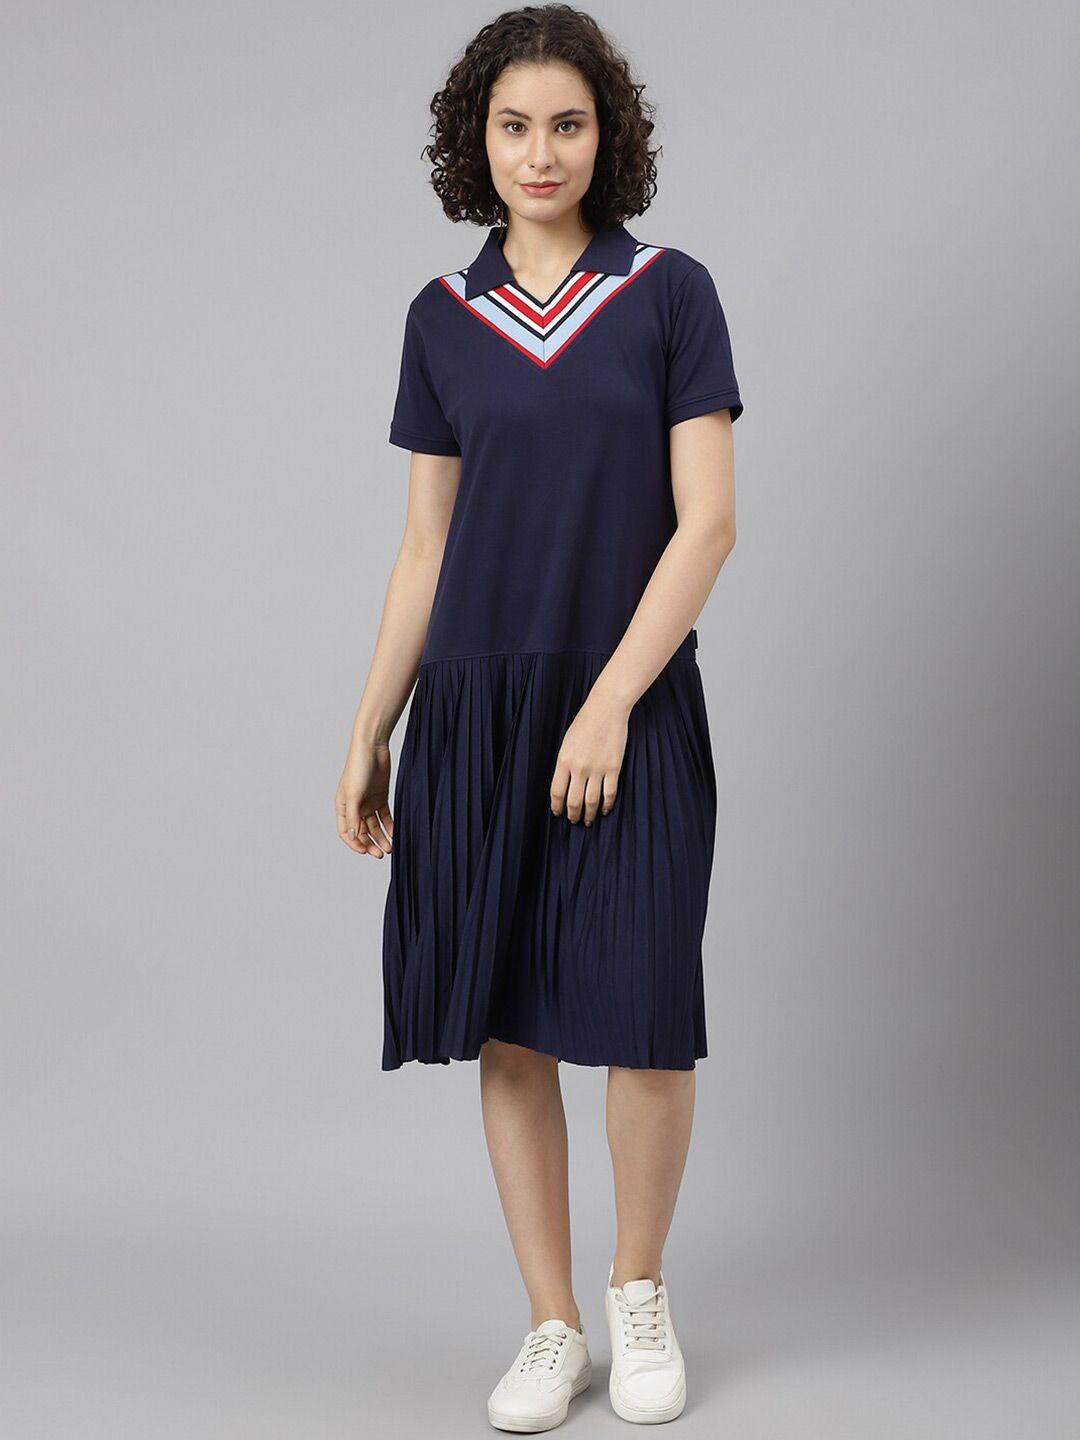 beverly hills polo club women navy blue solid pleated dress